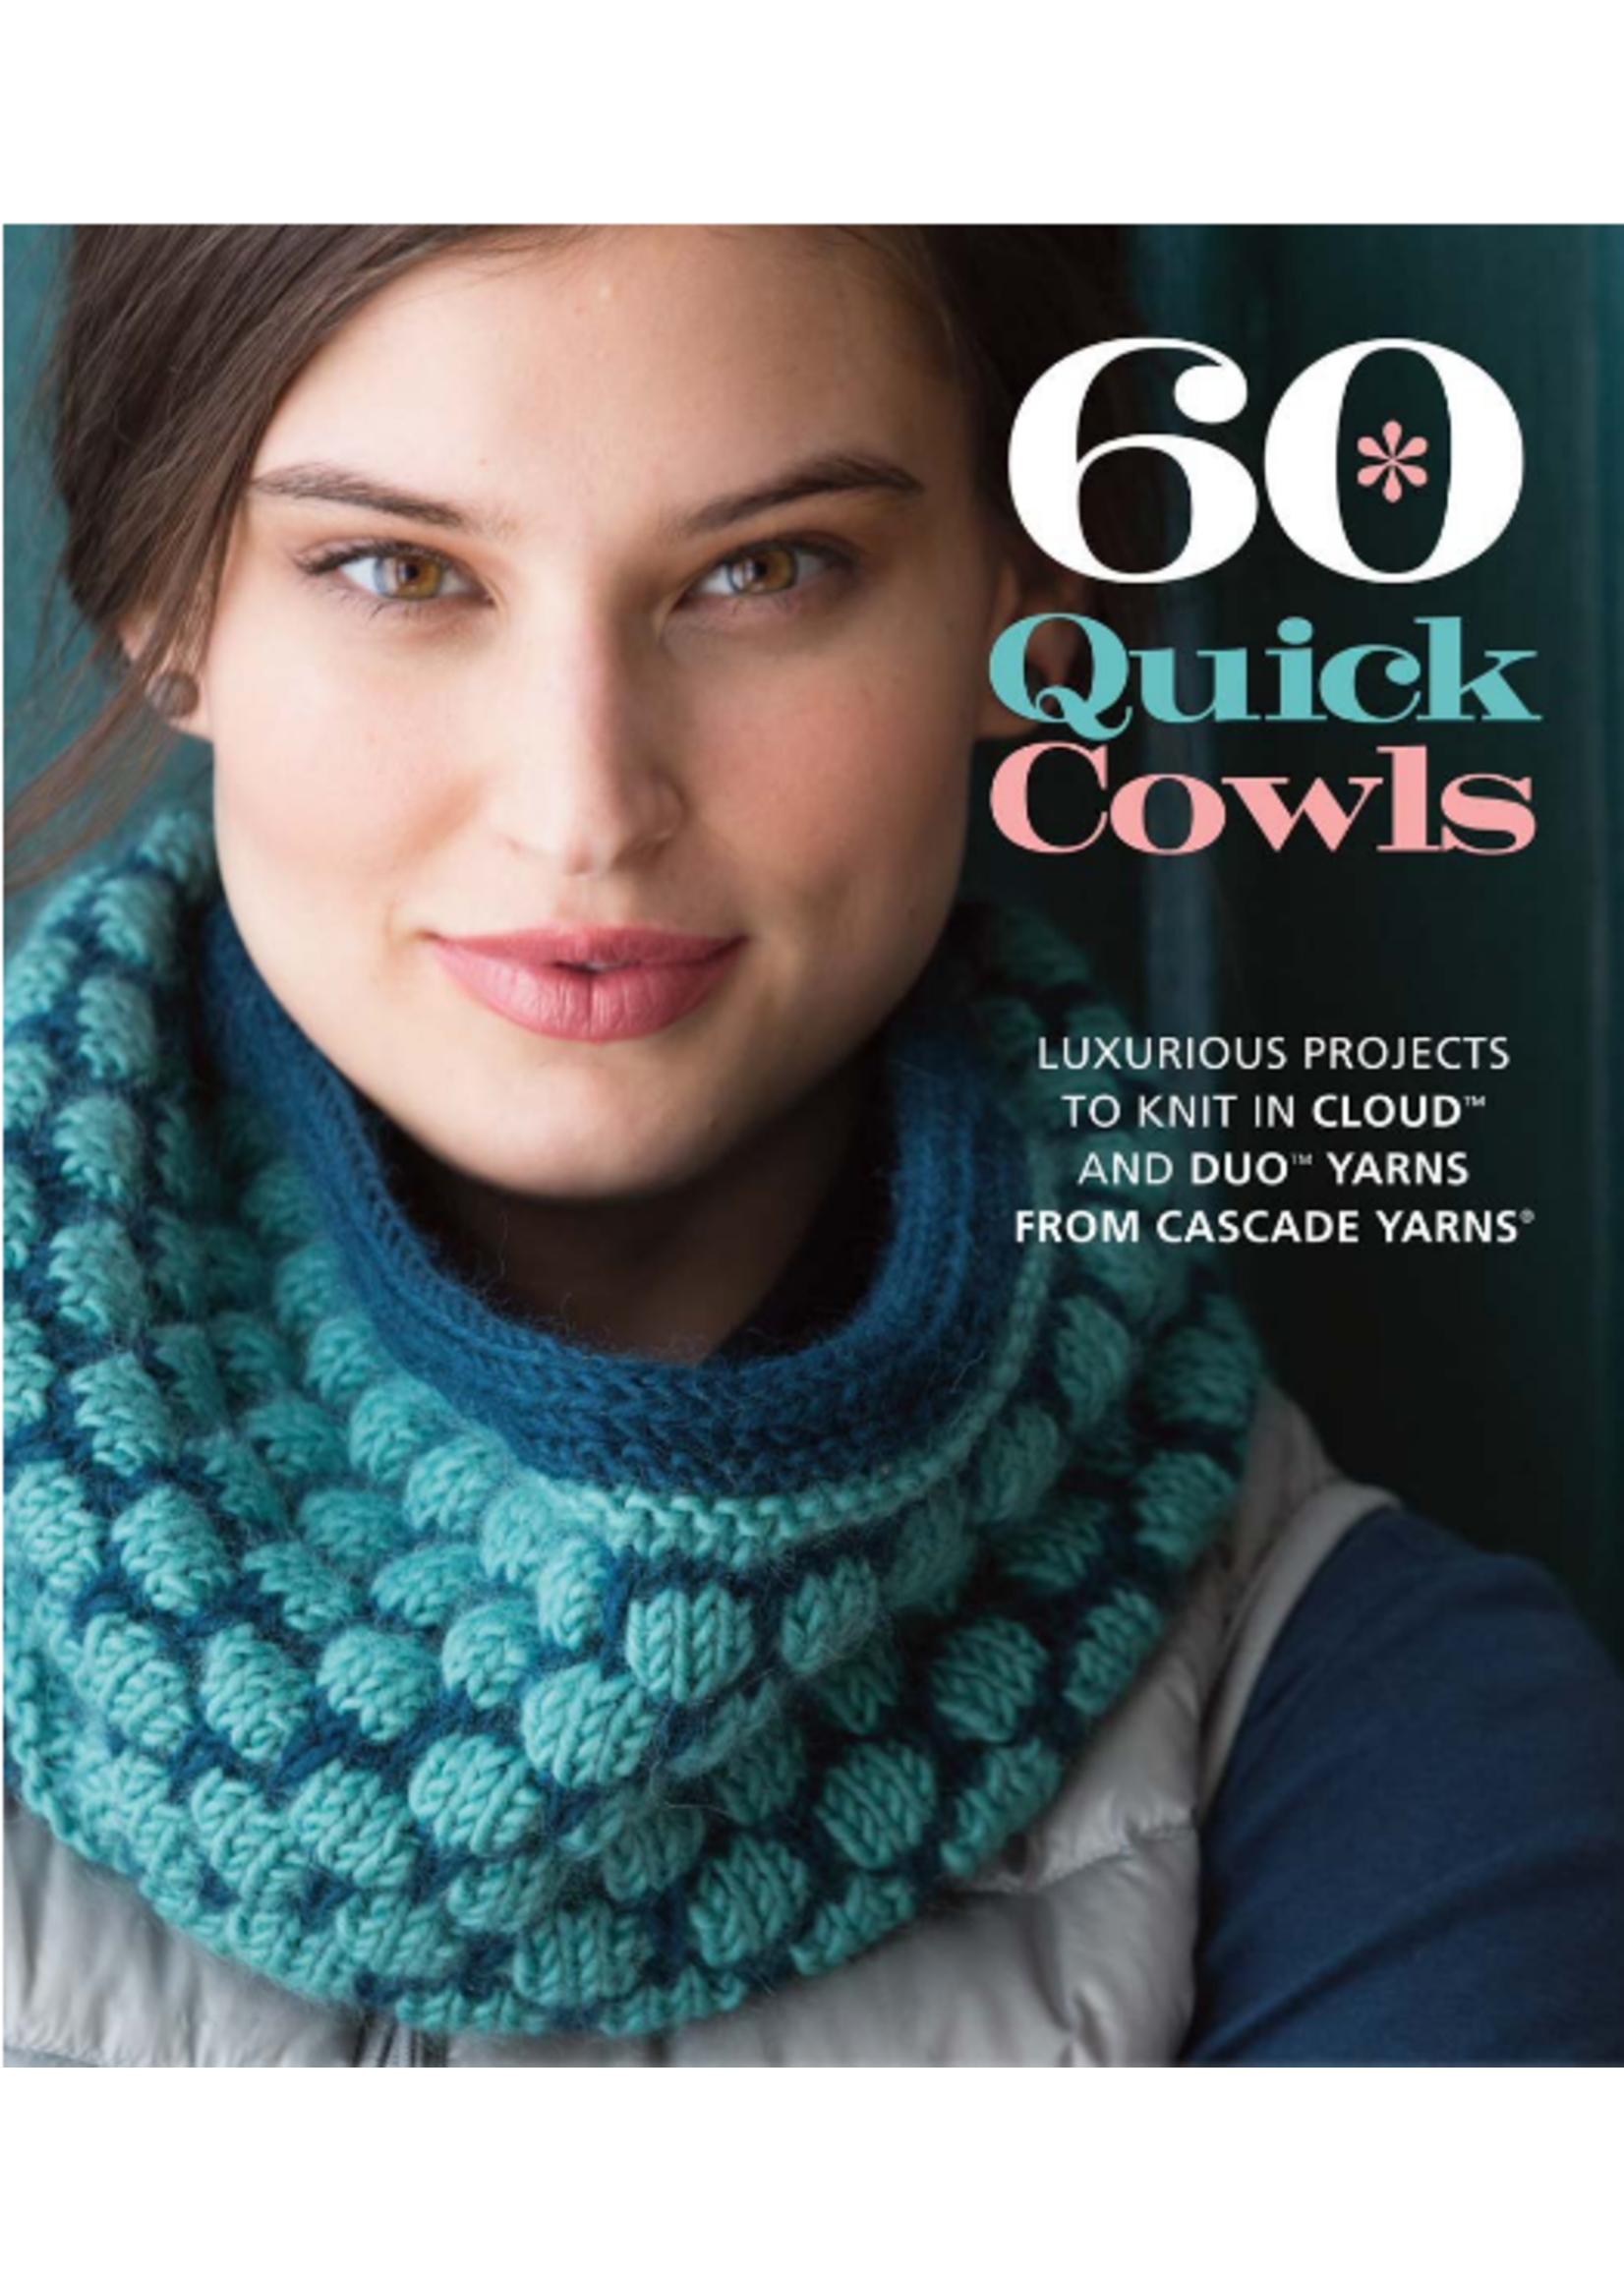 Cascade 60 Quick Cowls To Knit in Cloud &a Duo